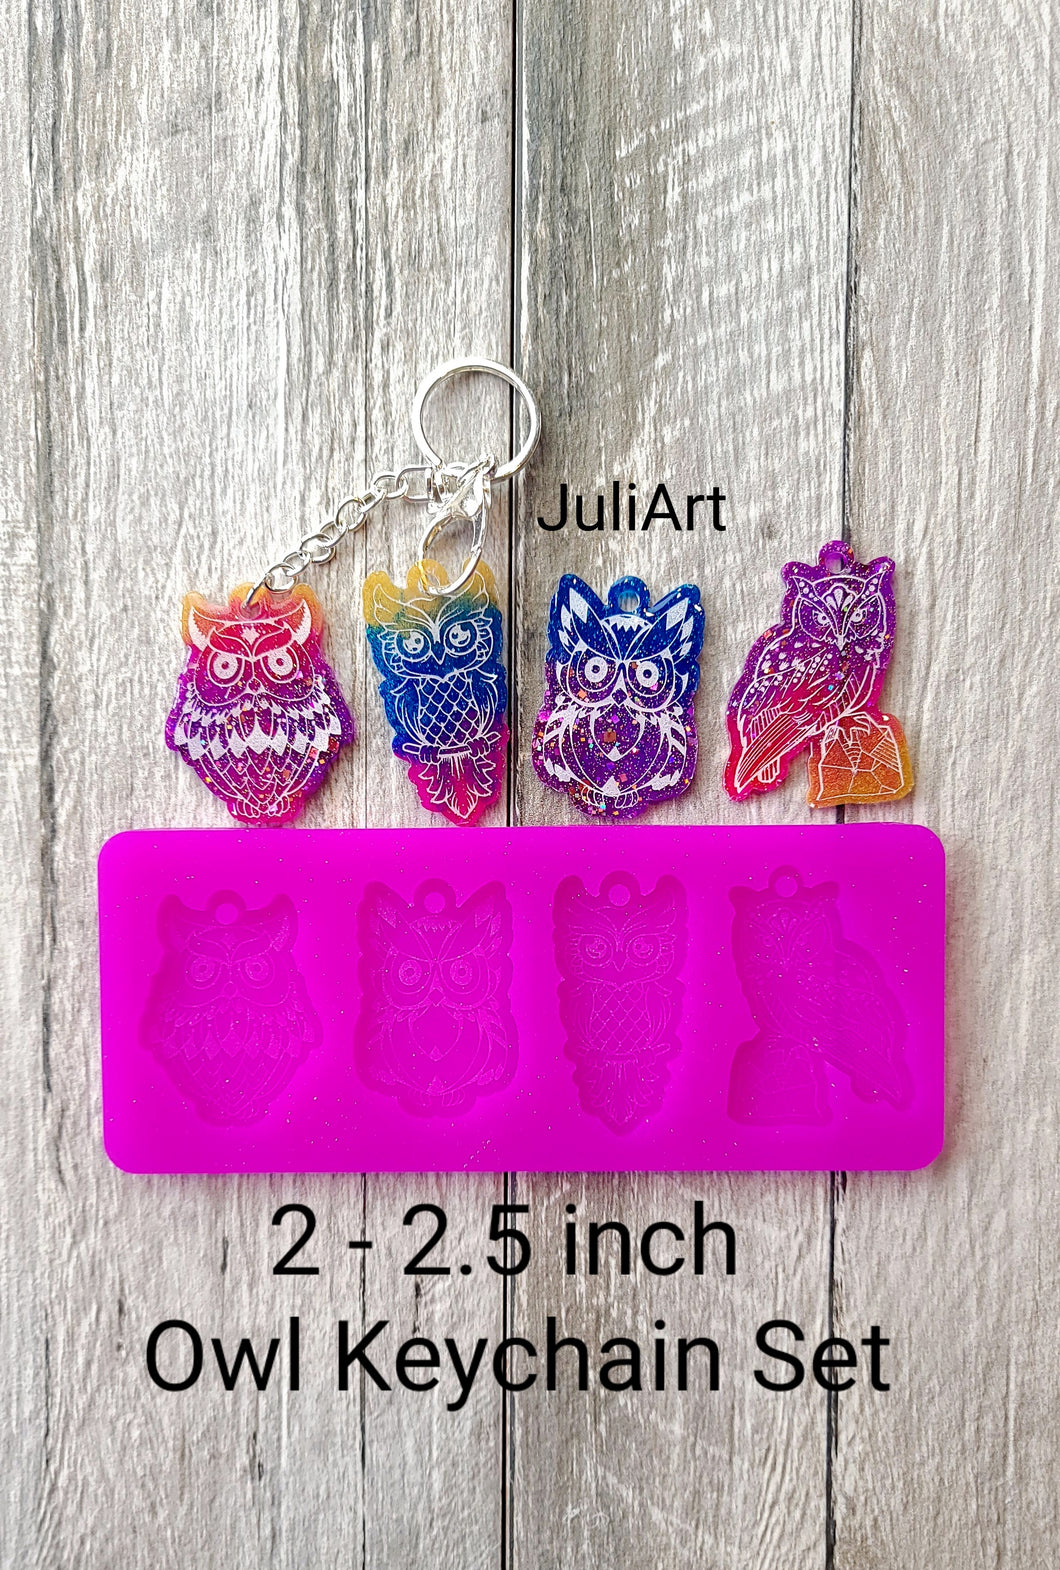 2 - 2.5 inch Owl Keychain Set Silicone Mold for Resin casting